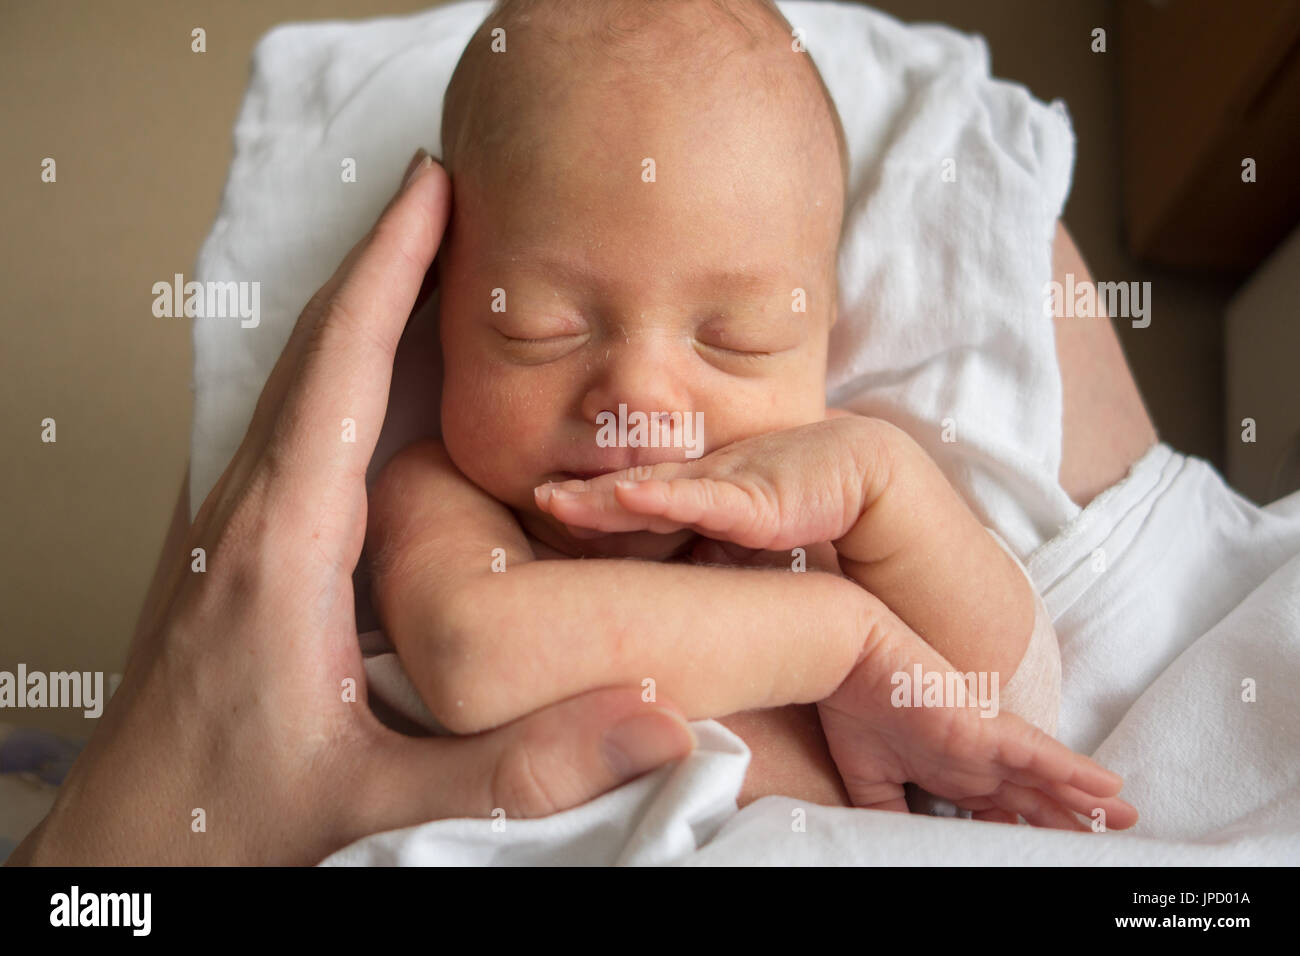 Baby on mother's hands Stock Photo